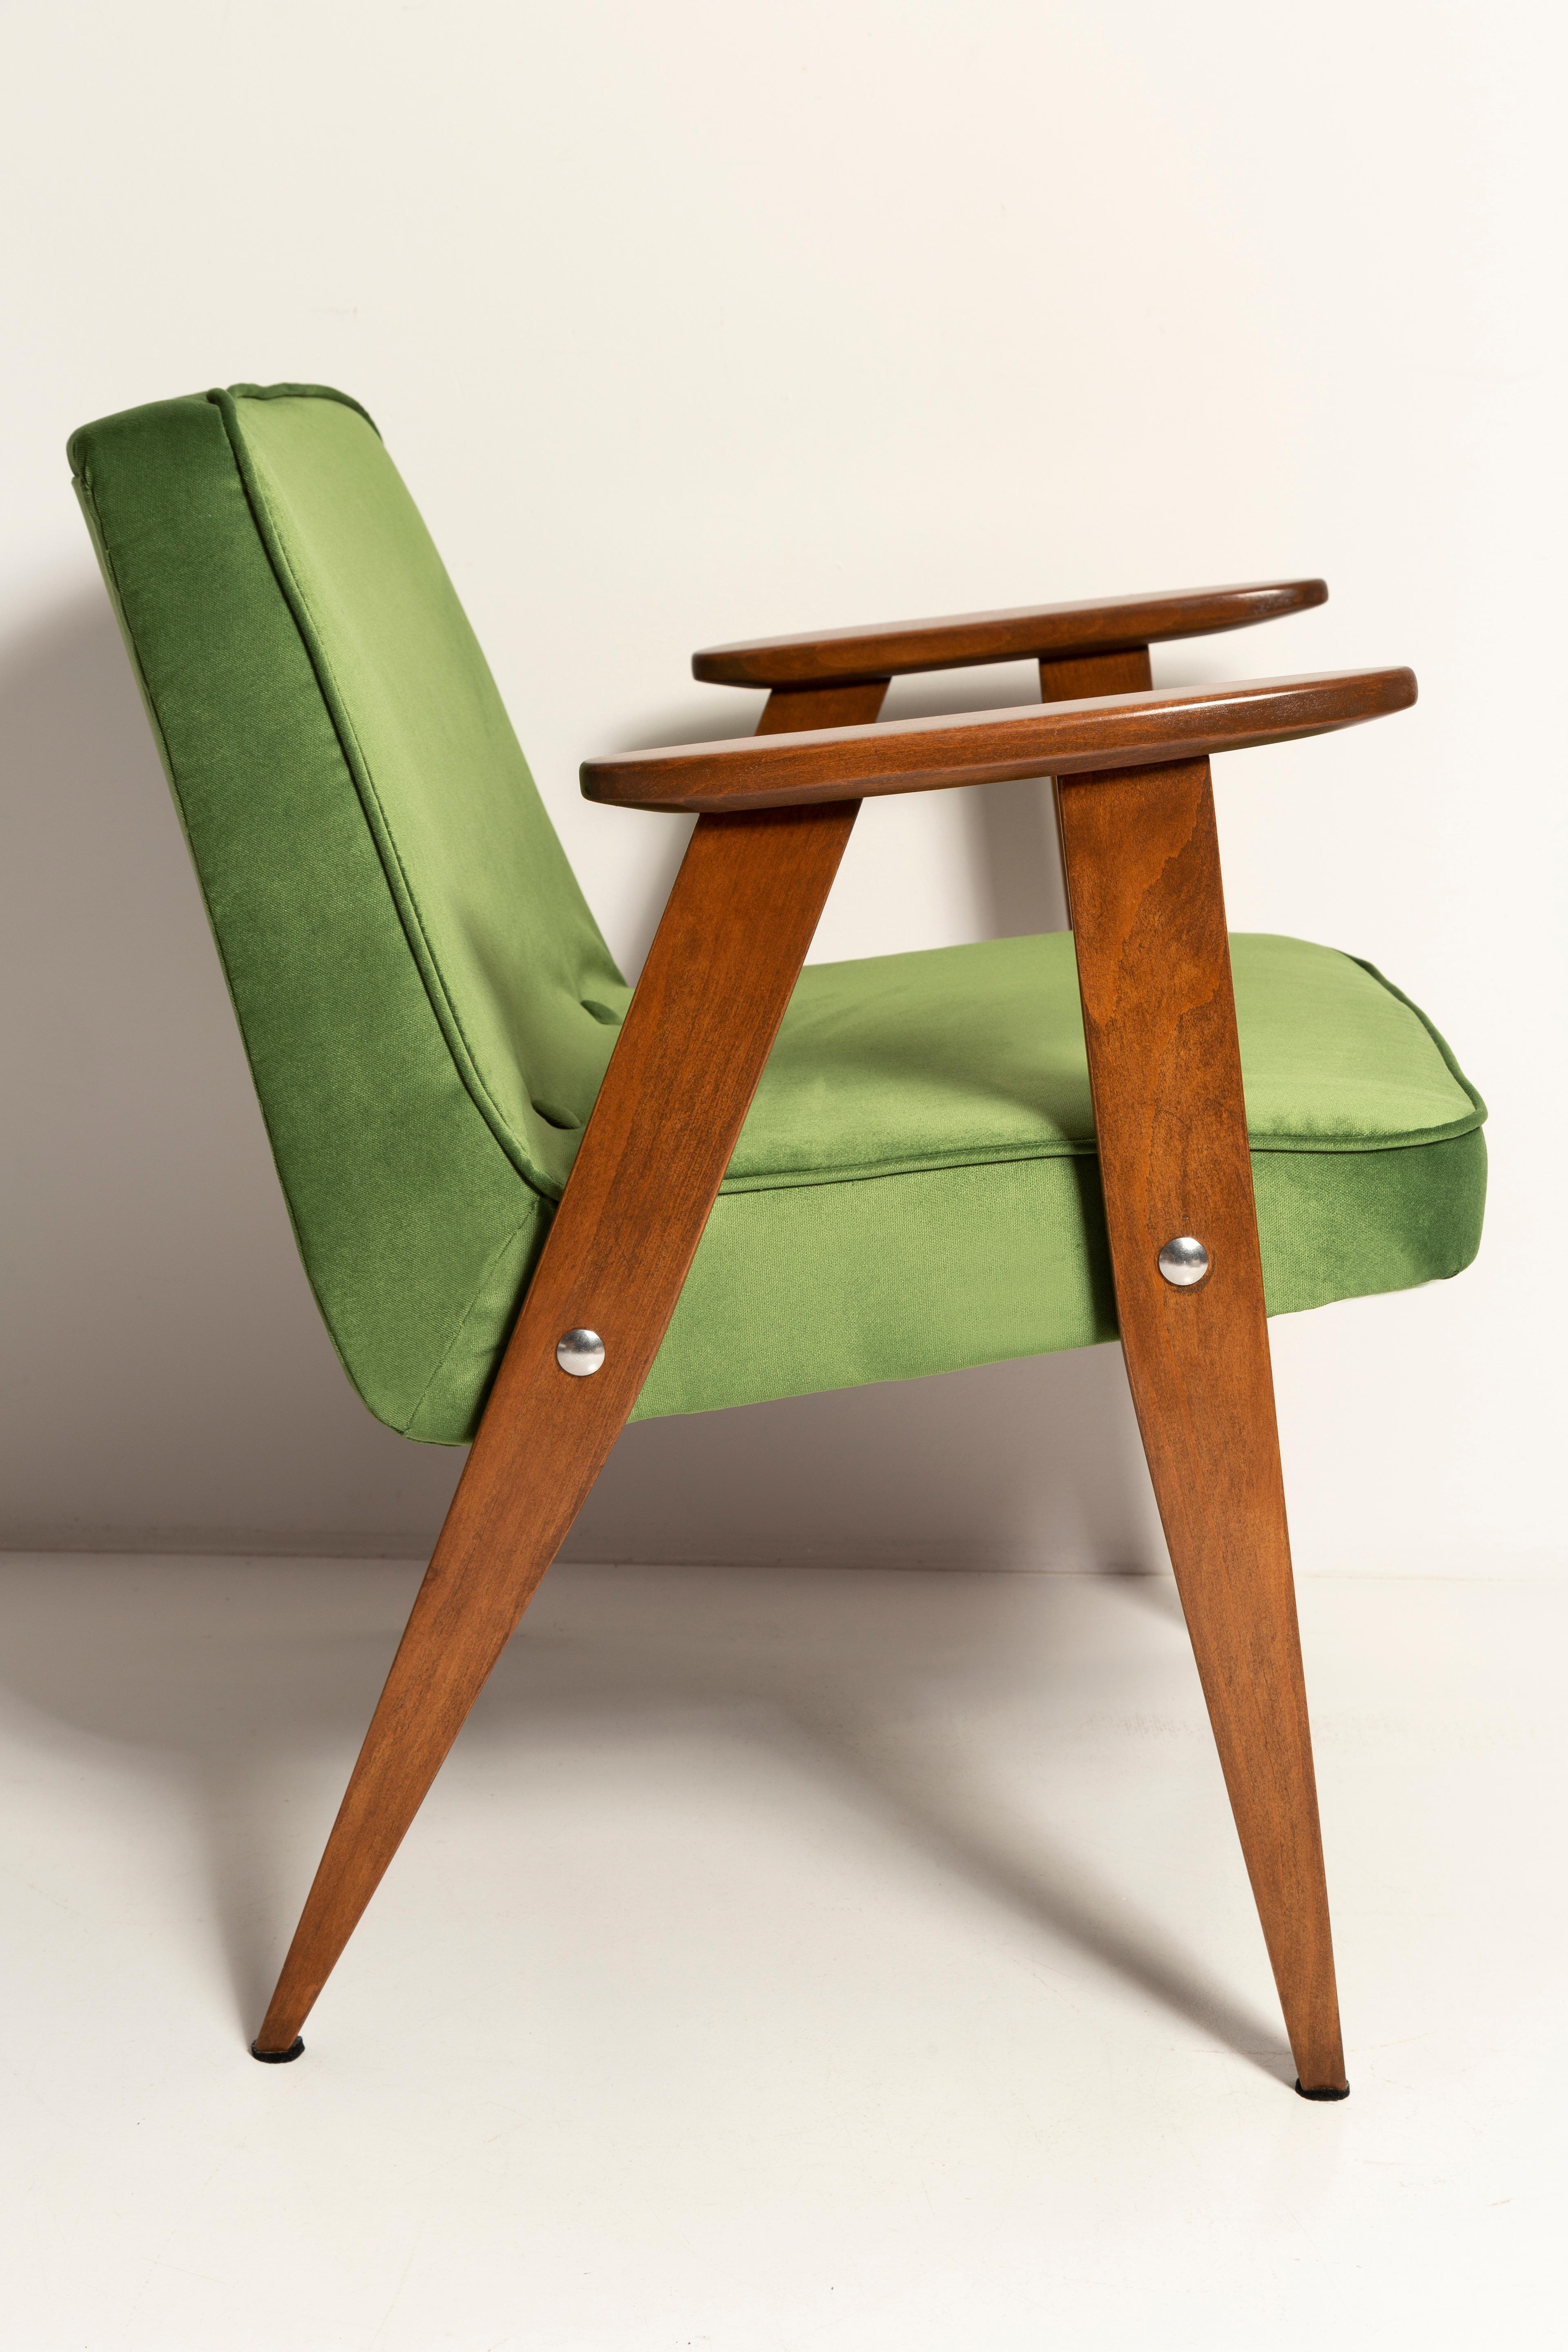 Hand-Crafted Pair of Mid-Century 366 Armchairs, Green and Orange, by Chierowski Europe, 1960s For Sale